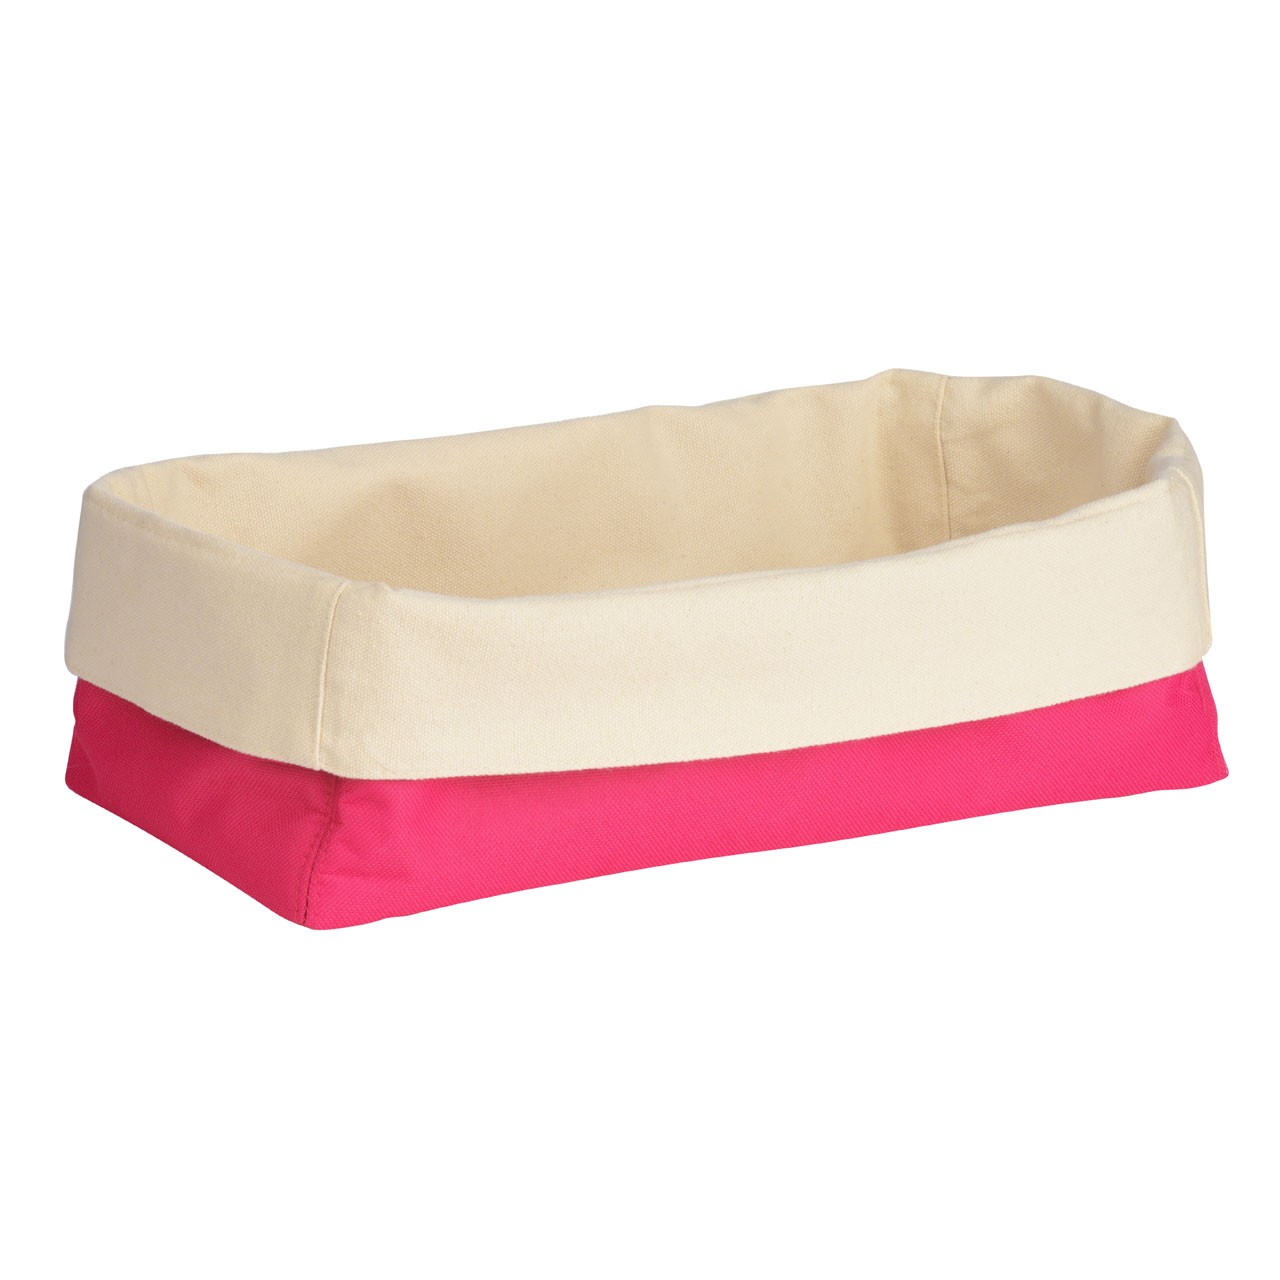 New Kitchen Bread Basket Hot Pink And Cream Folded Design Polyes